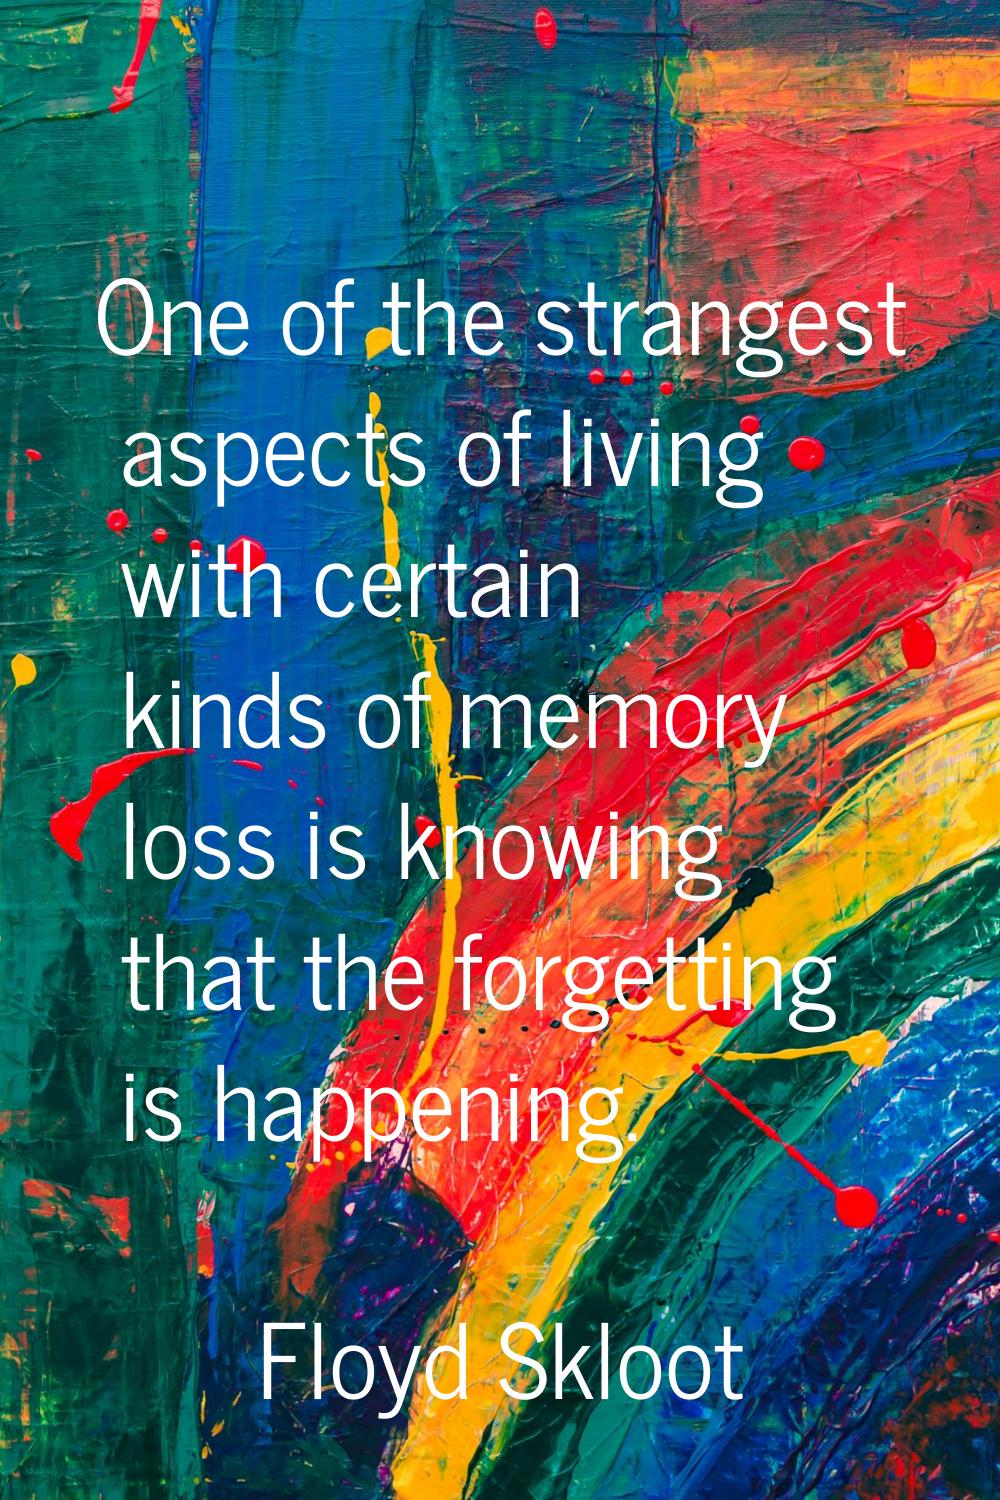 One of the strangest aspects of living with certain kinds of memory loss is knowing that the forget